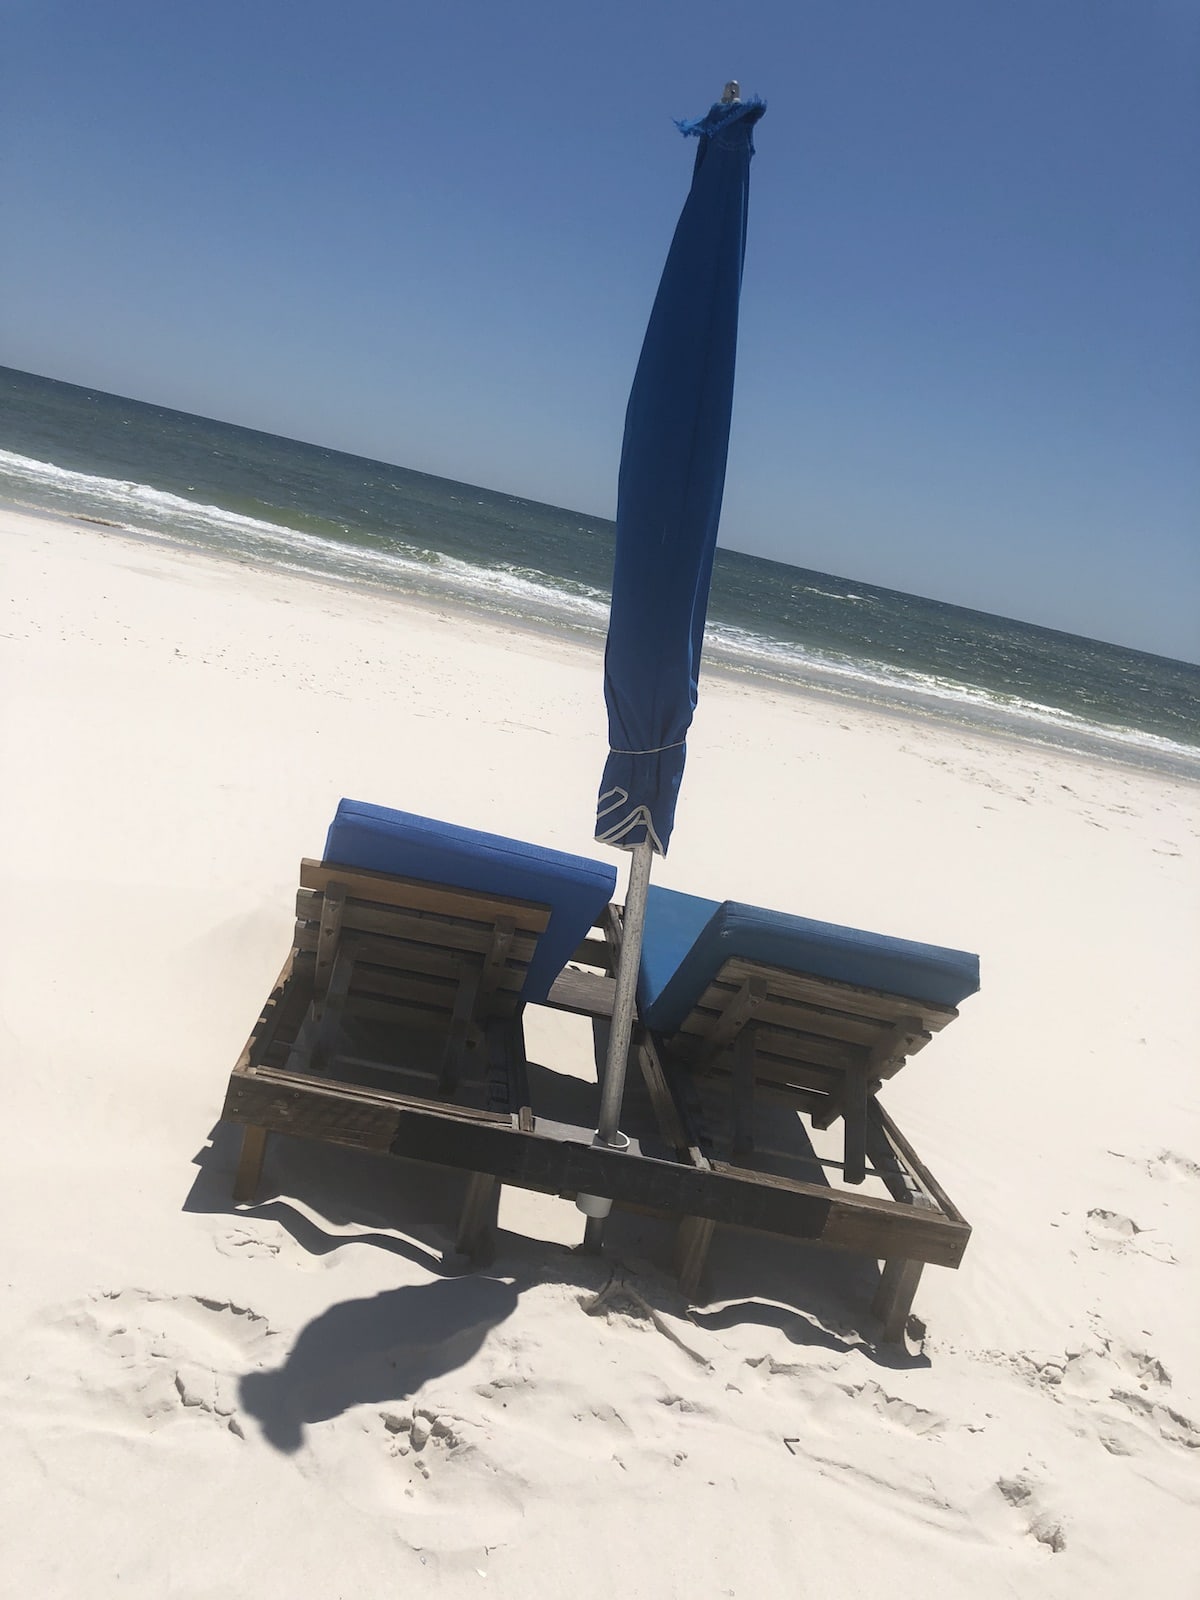 Gulf Shores, Alabama for a Girlfriend Getaway: 5 Reasons to Go - The Beaches